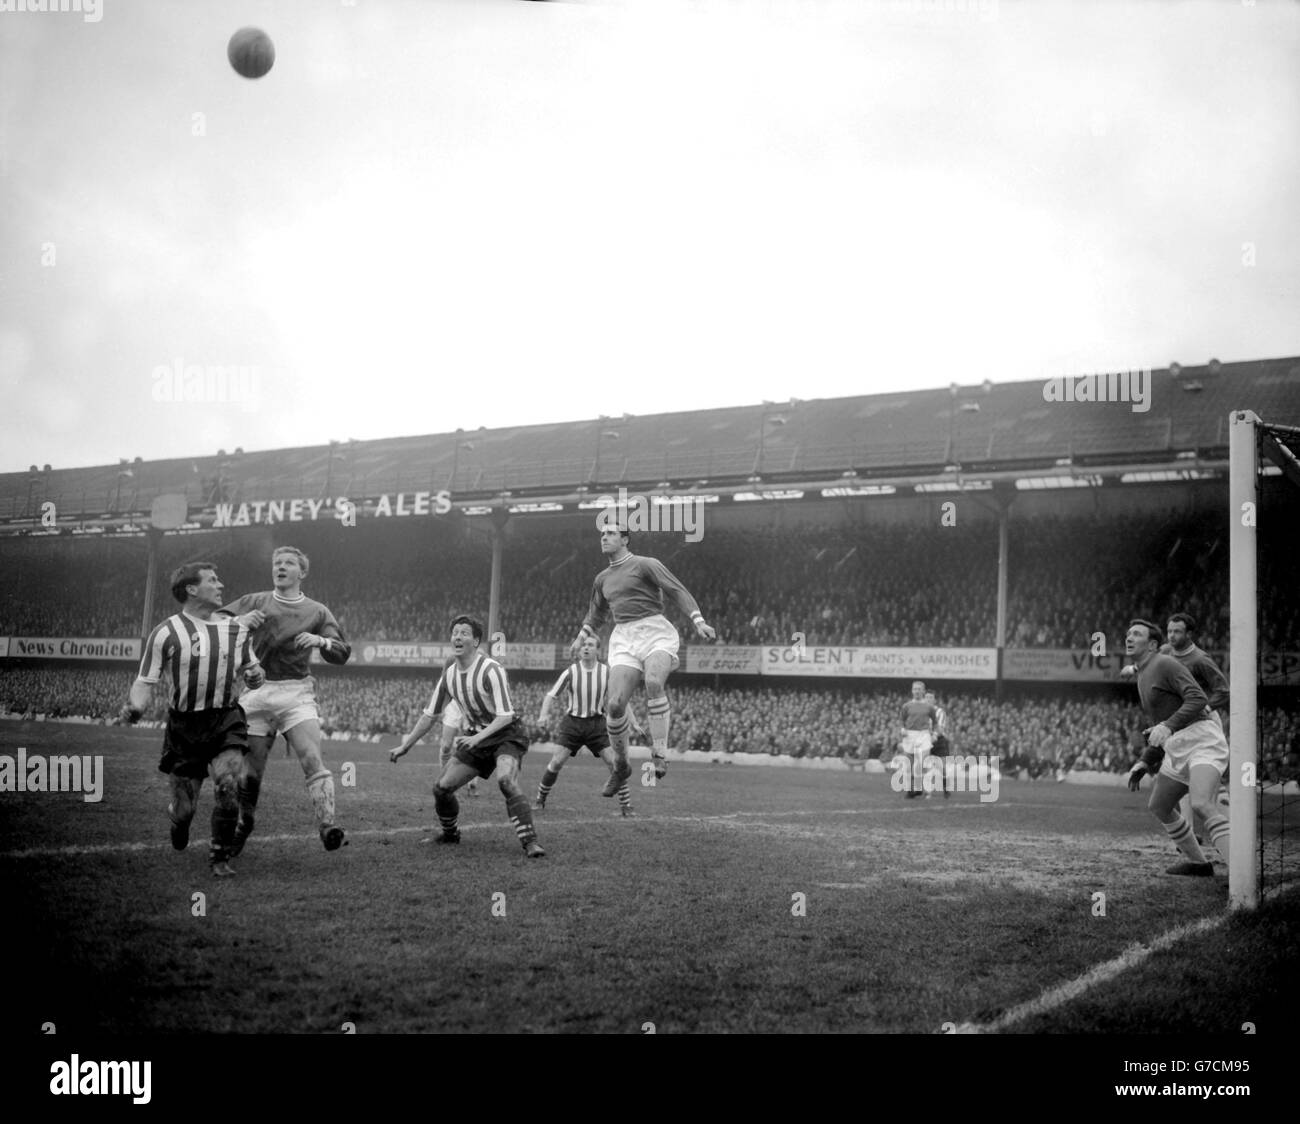 The exultation of the chase grips Southampton attackers (stripes) as, harried by defenders, they raid the Leyton Orient goal during the fourth roudn FA Cup tie at The Dell. Left to Right: O'Brien, Lea, Mulgrew, Derek Reeves, Bishop (jumping). Orient won the match 2-0. Stock Photo